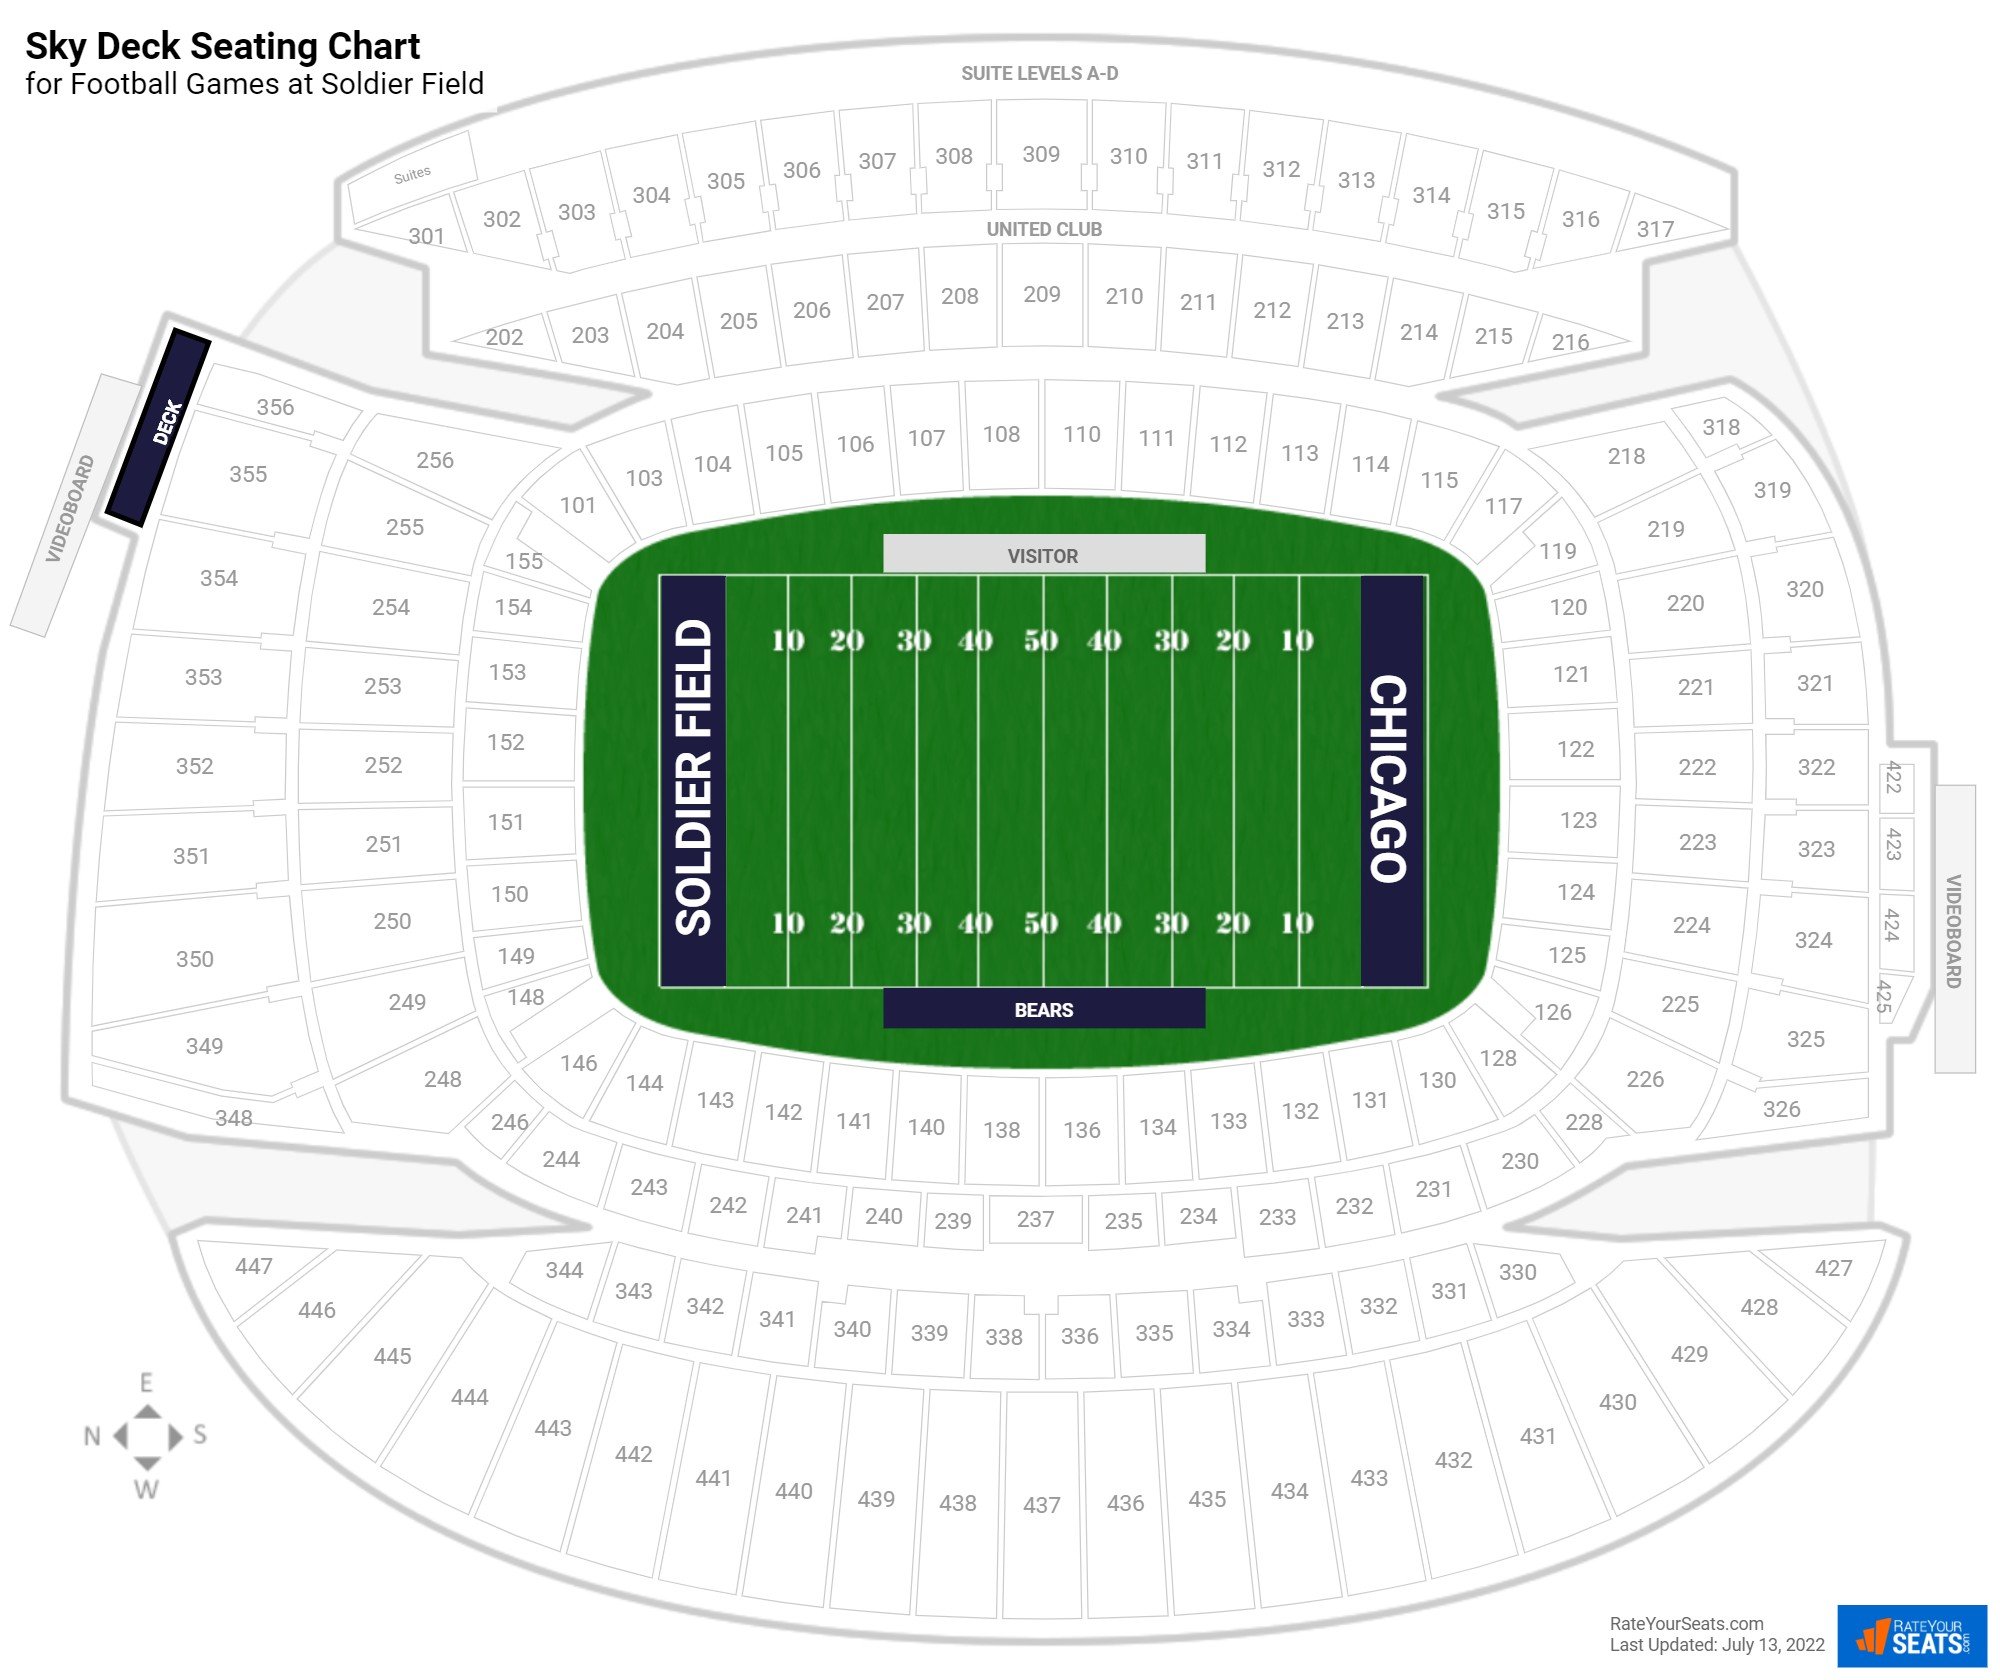 Football Sky Deck Seating Chart at Soldier Field